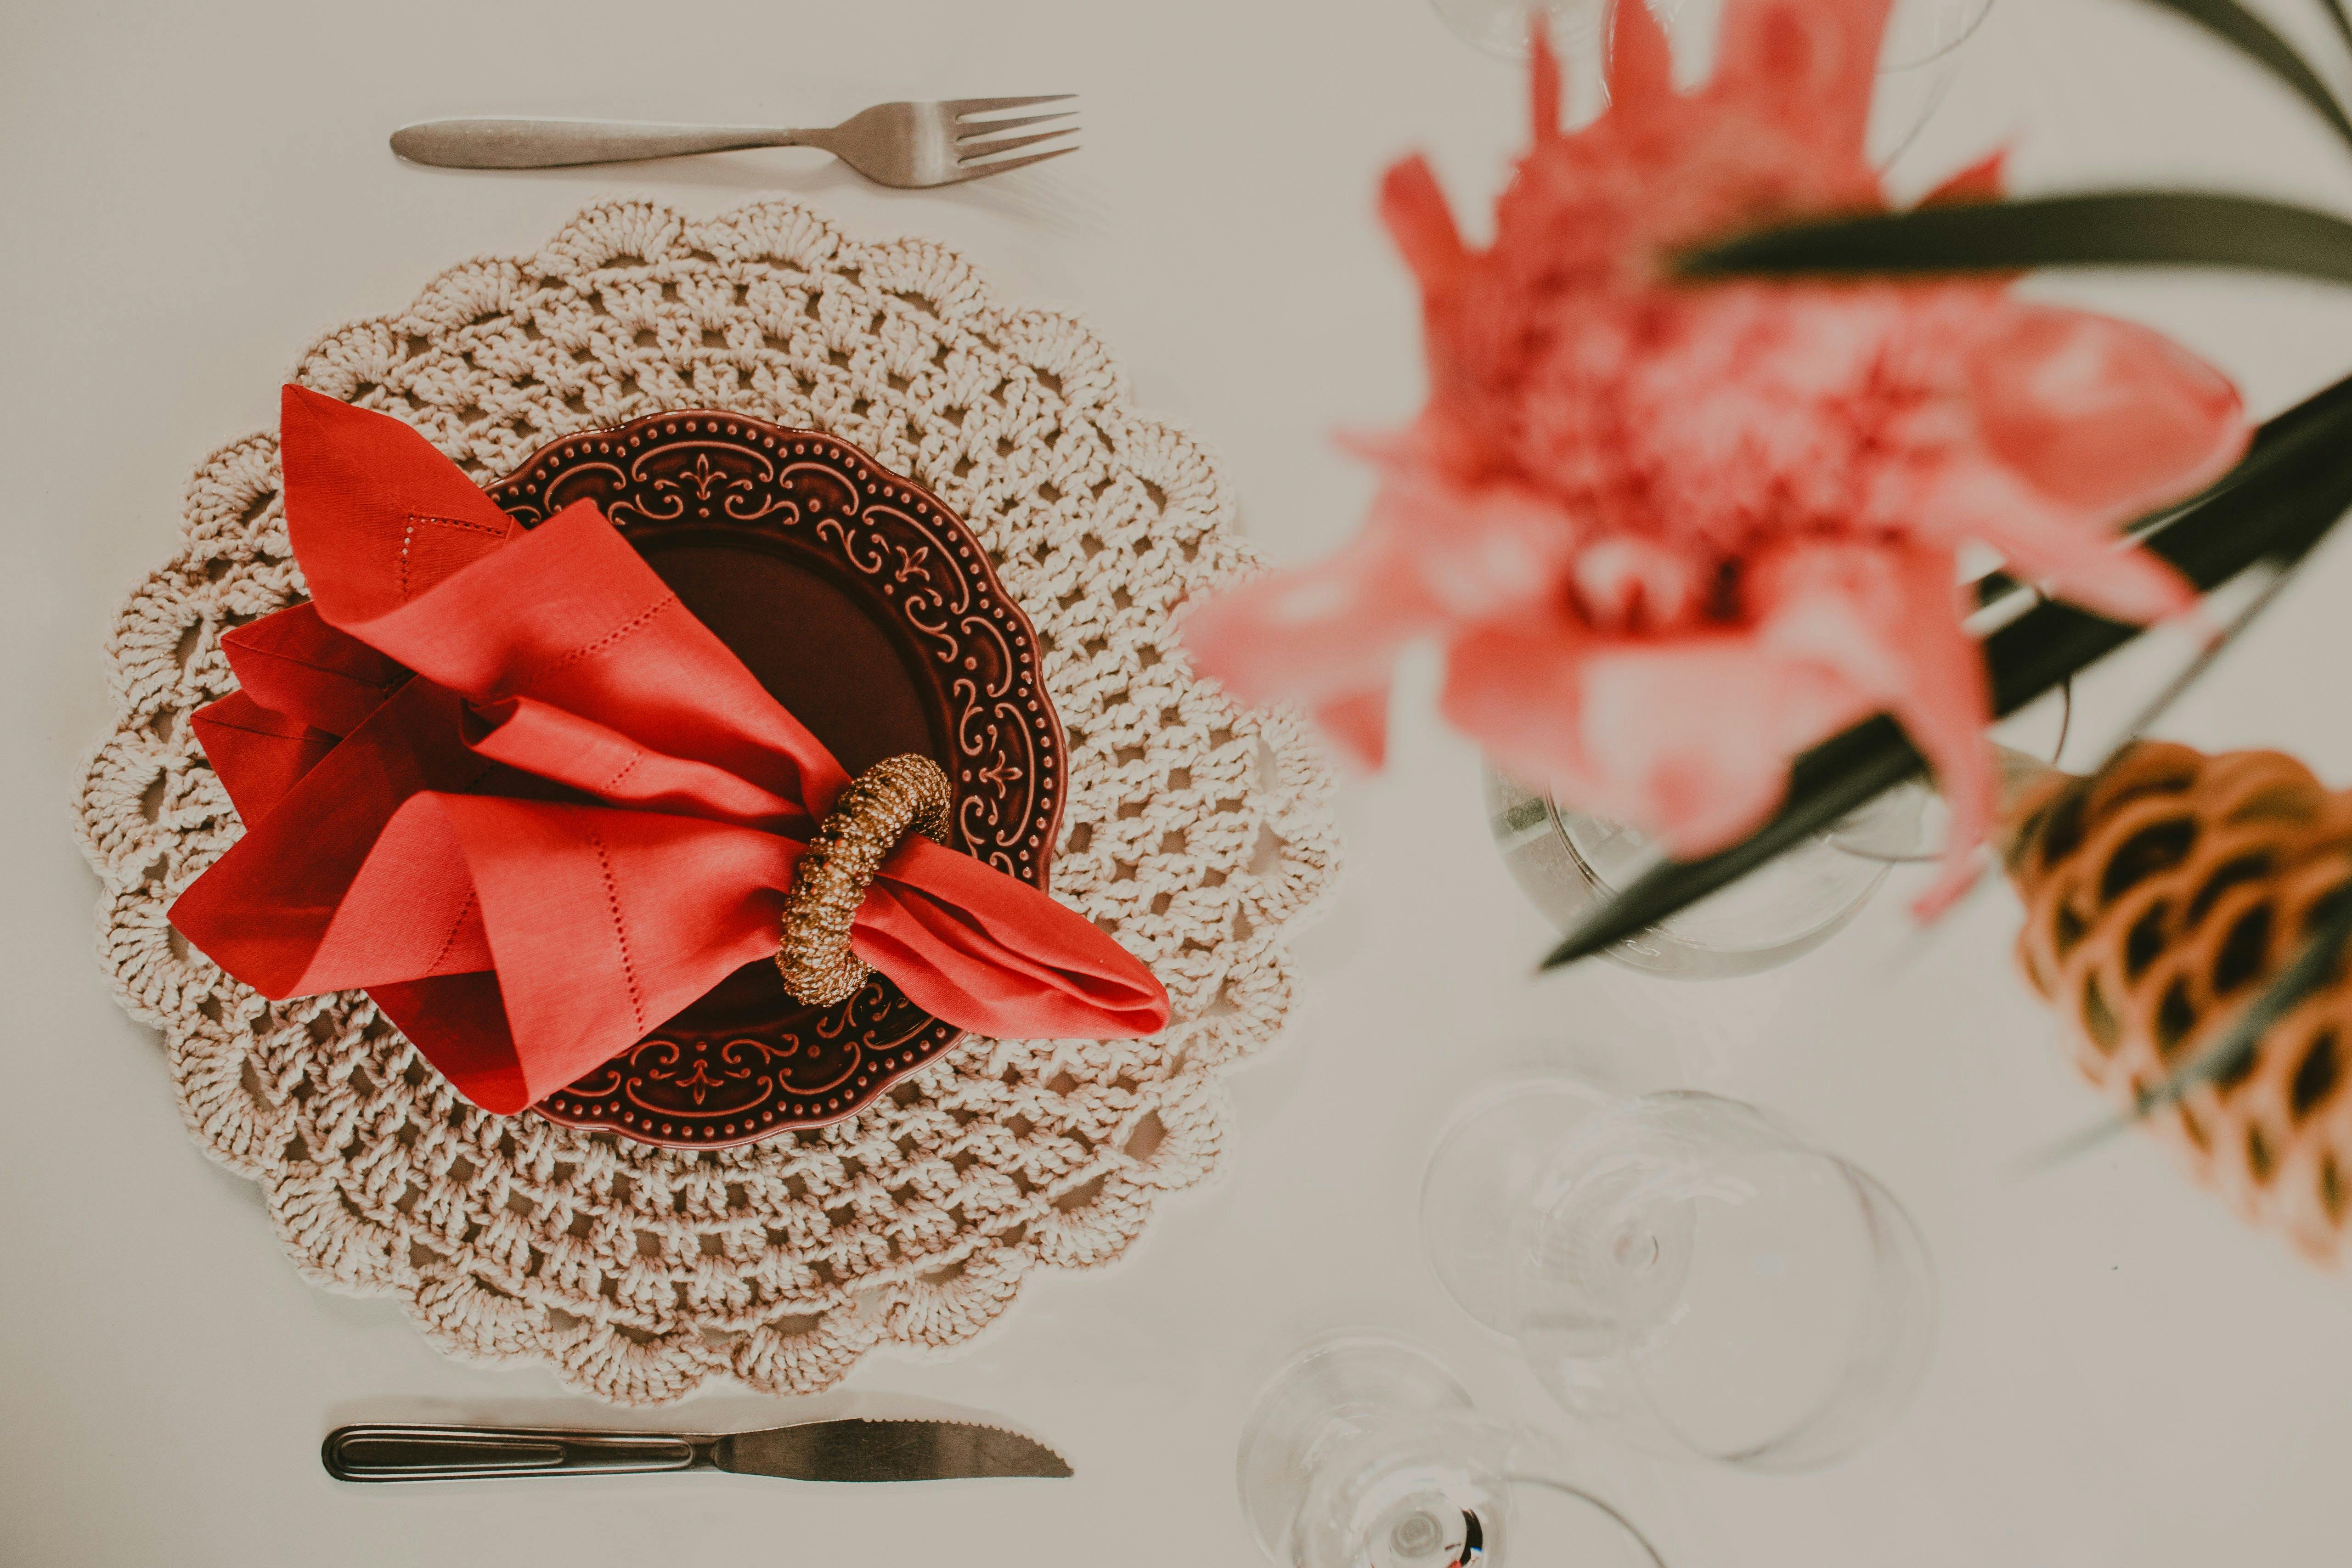 Surviving the holiday table talk